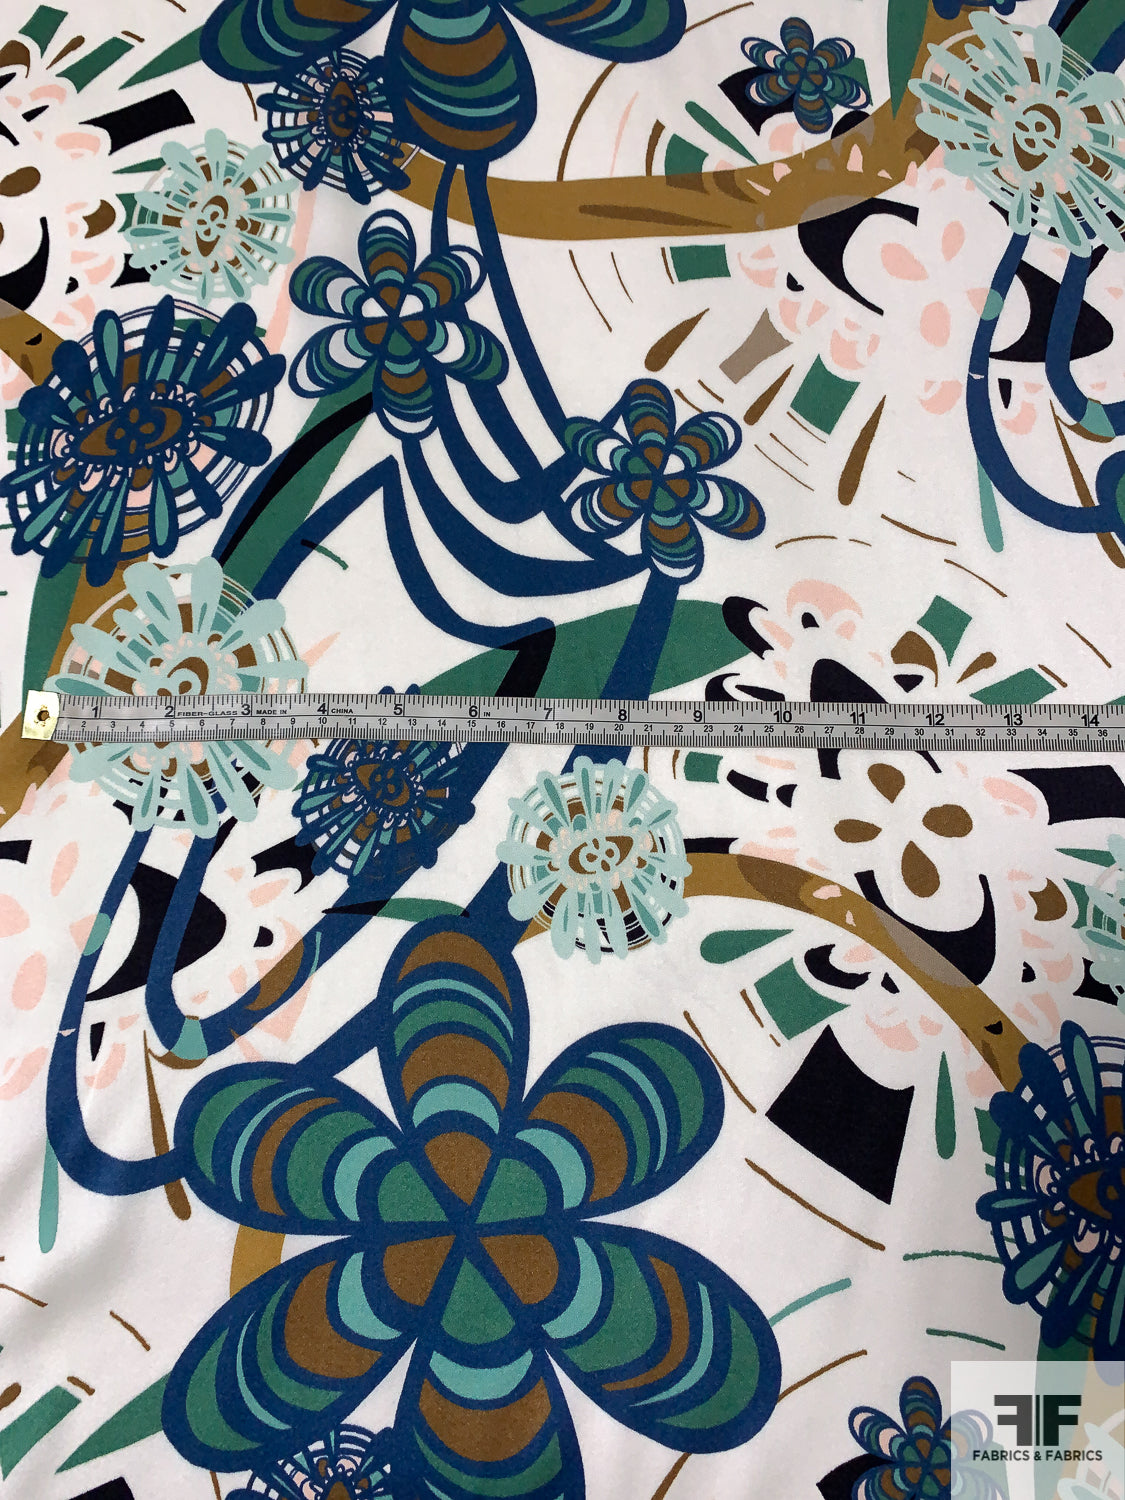 Groovy Flowers and Rings Printed Silk Charmeuse - Navy Blue / Sea Greens / Antique Gold